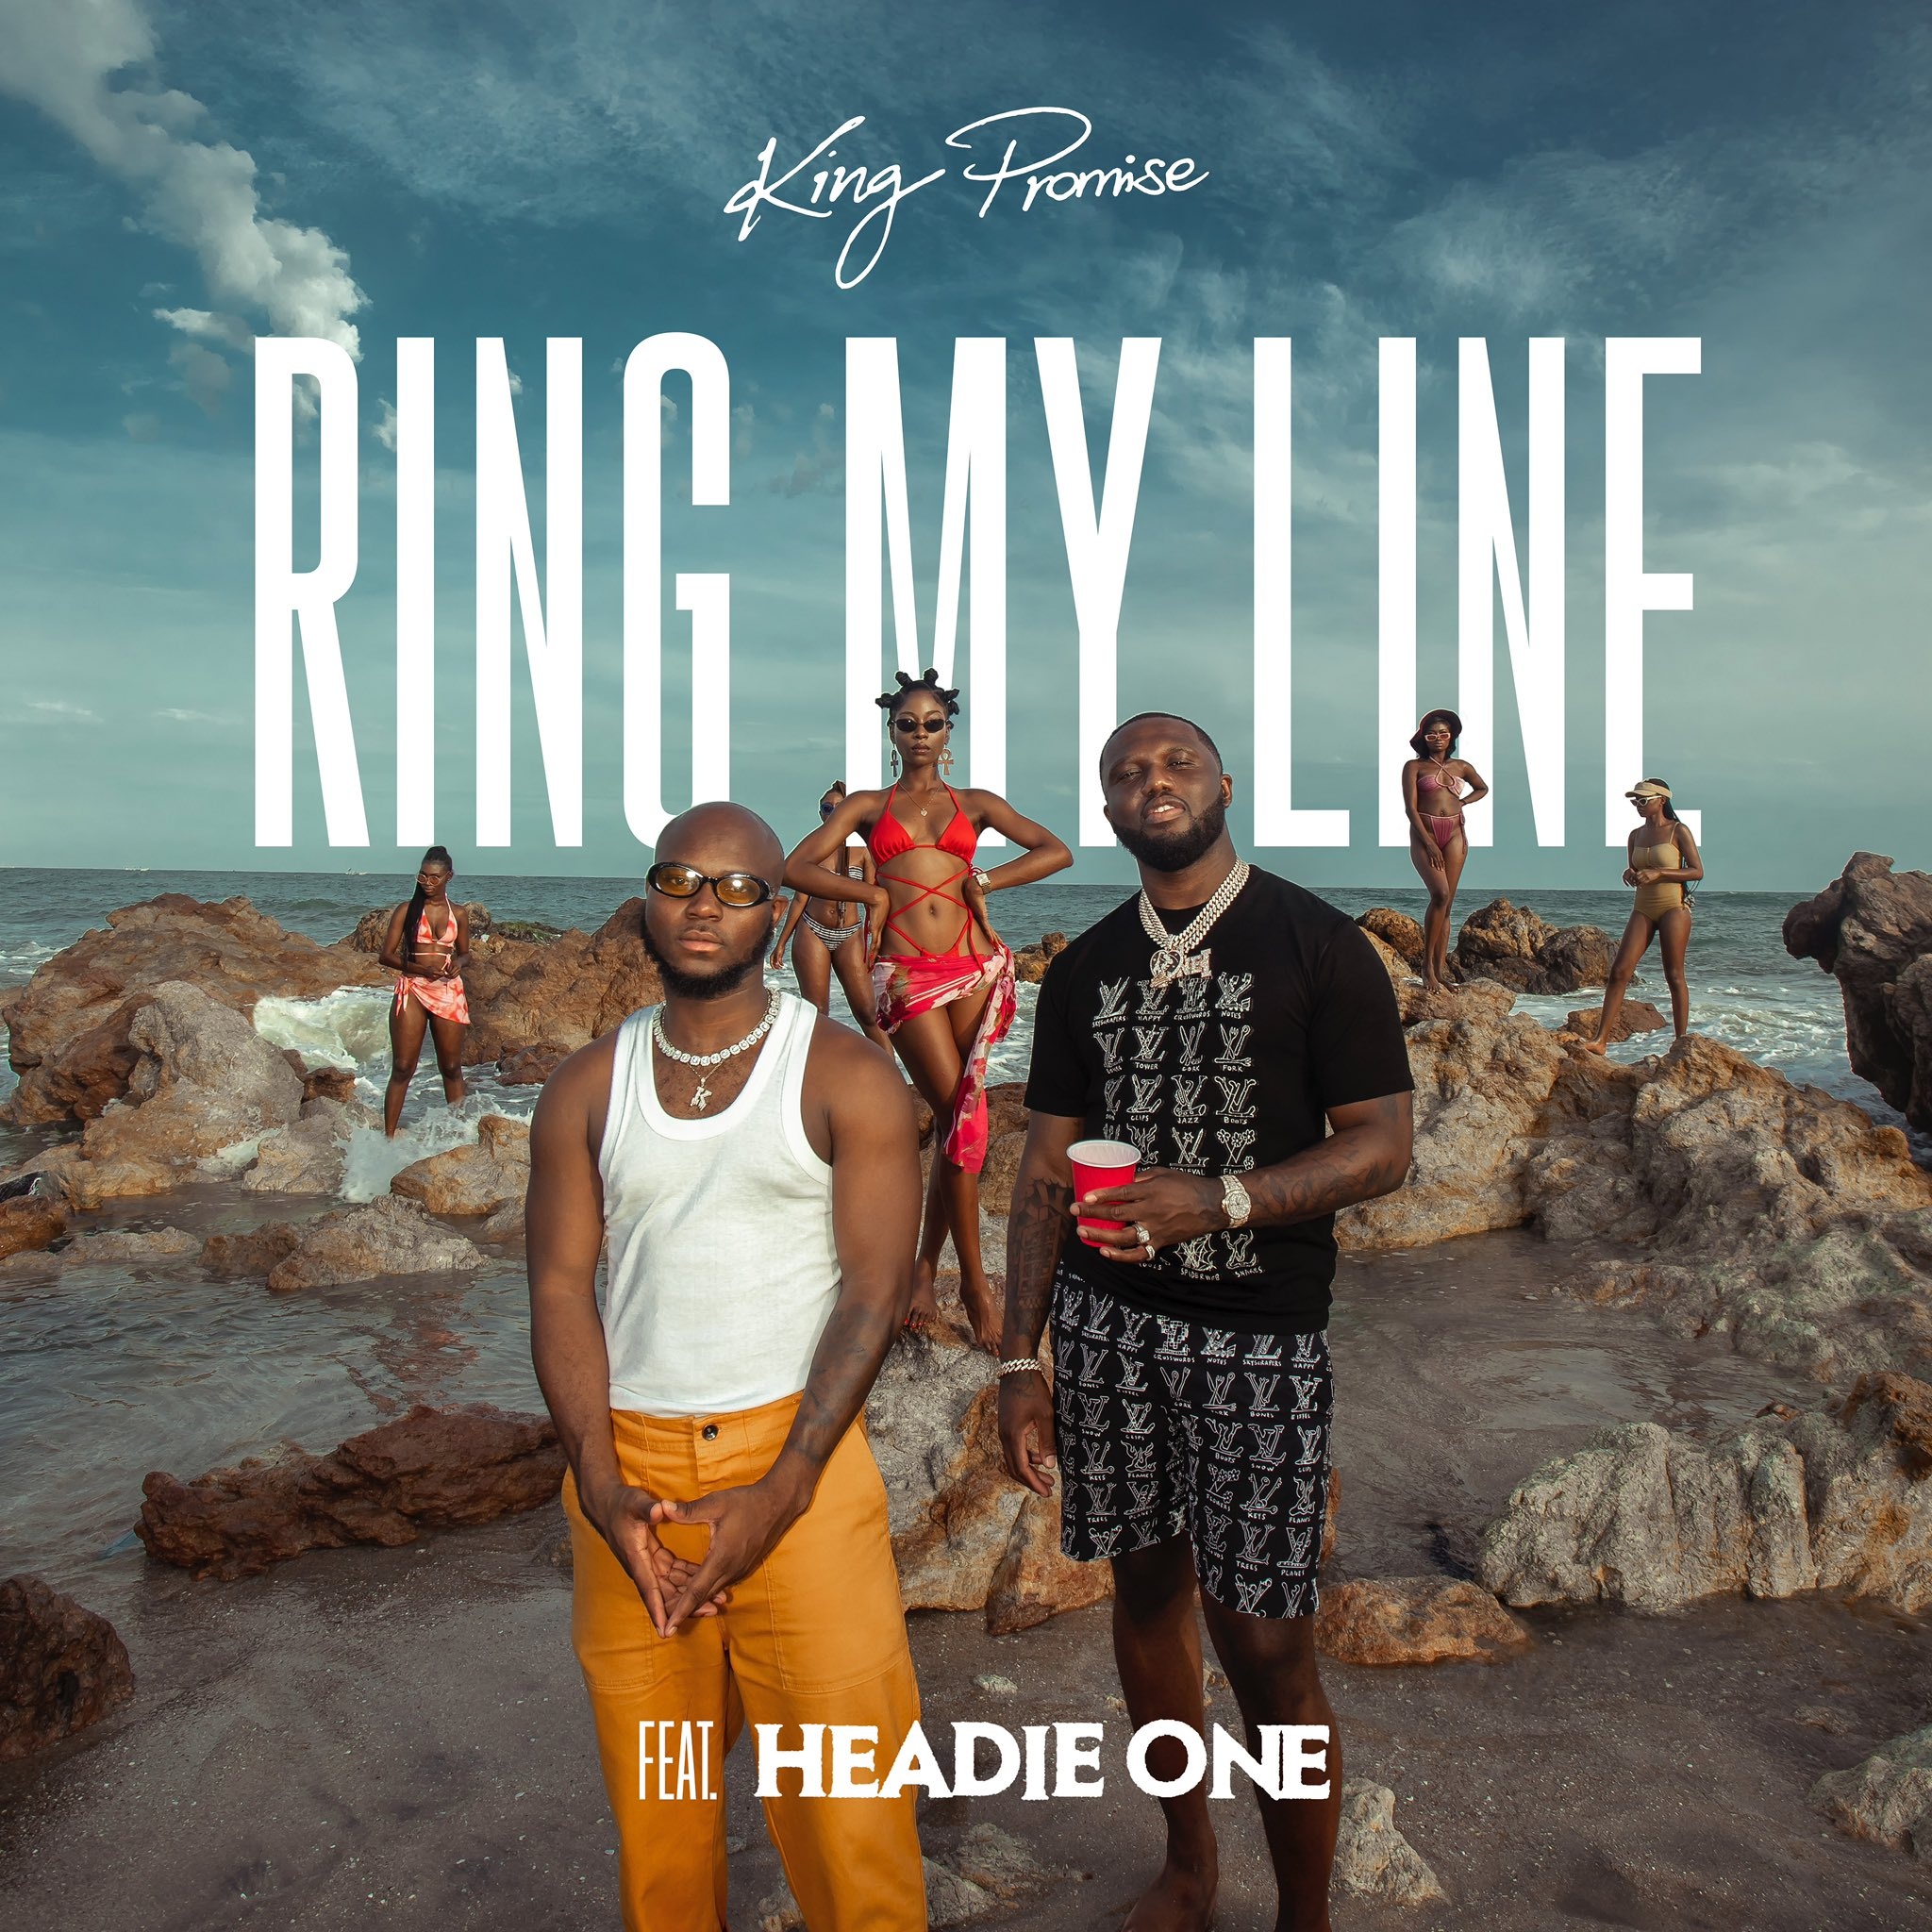 King Promise, Download MP3, Ring my line, Headie One, 2050x2050 HD Phone